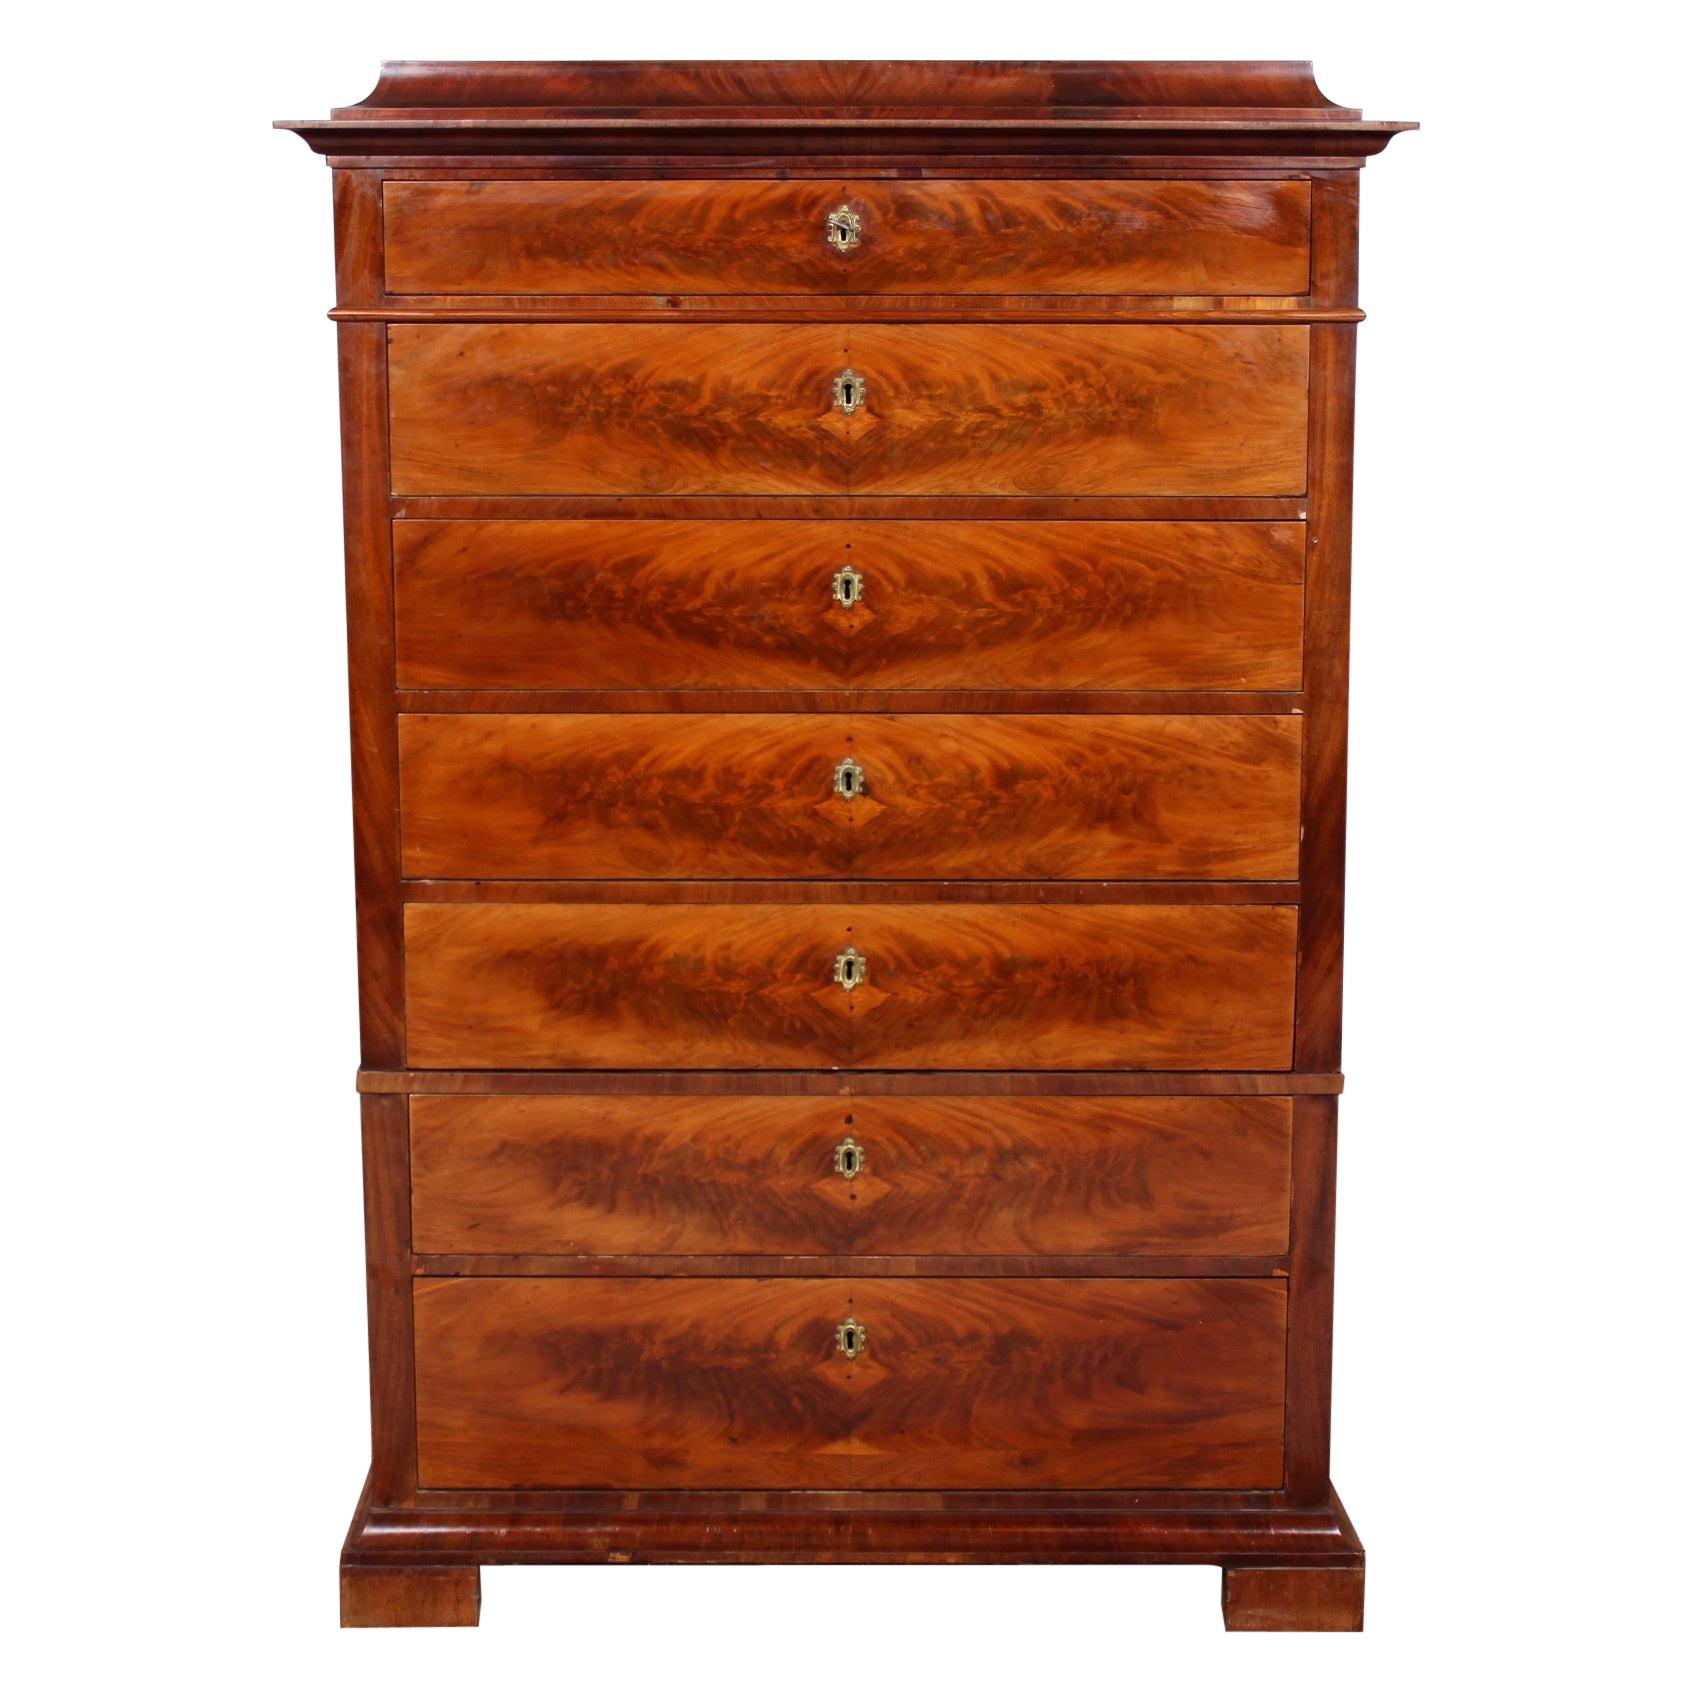 Danish Biedermeier Chest of Drawers 19th Century Flamed Mahogany For Sale